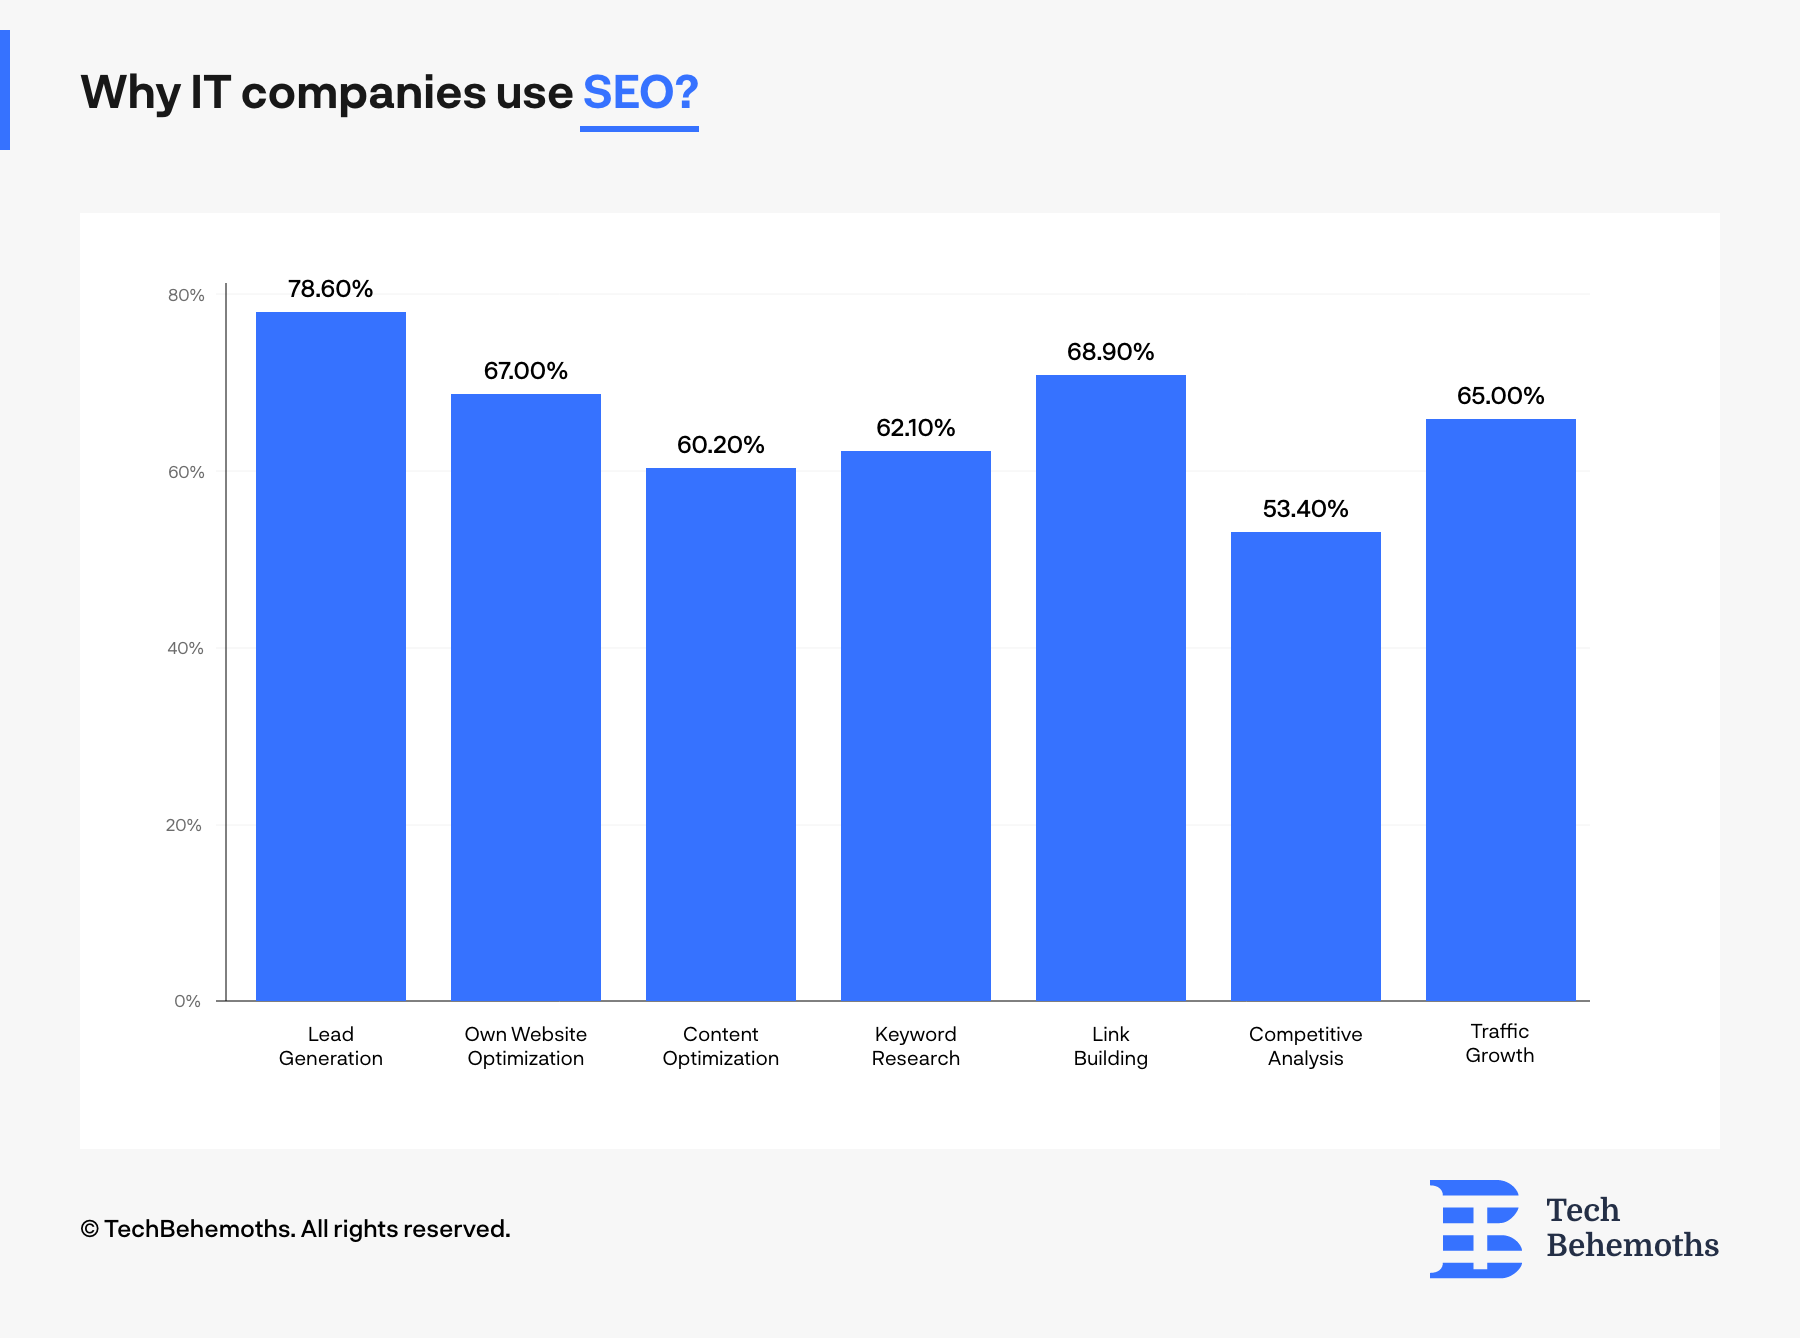 78.6% of IT companies use SEO services for lead generation